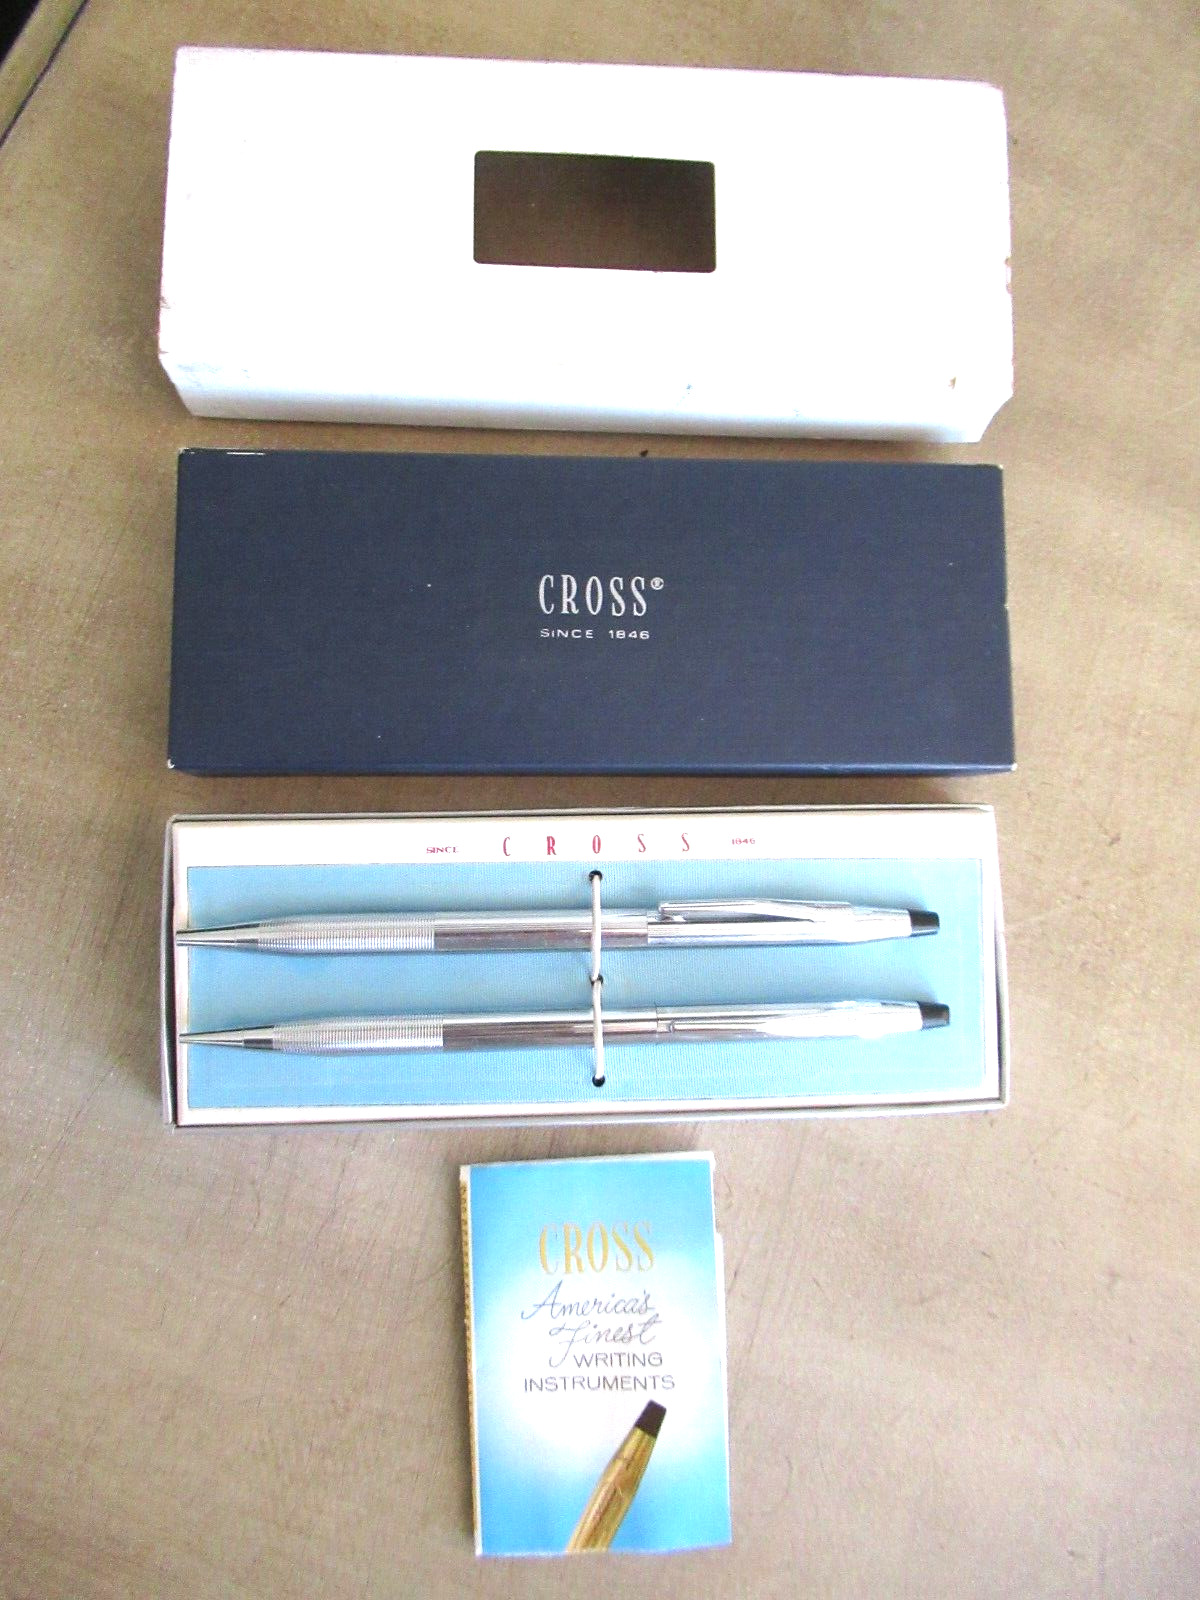 Cross 3501 Chrome Pen and Pencil Set Blue Ink Beautiful Condition